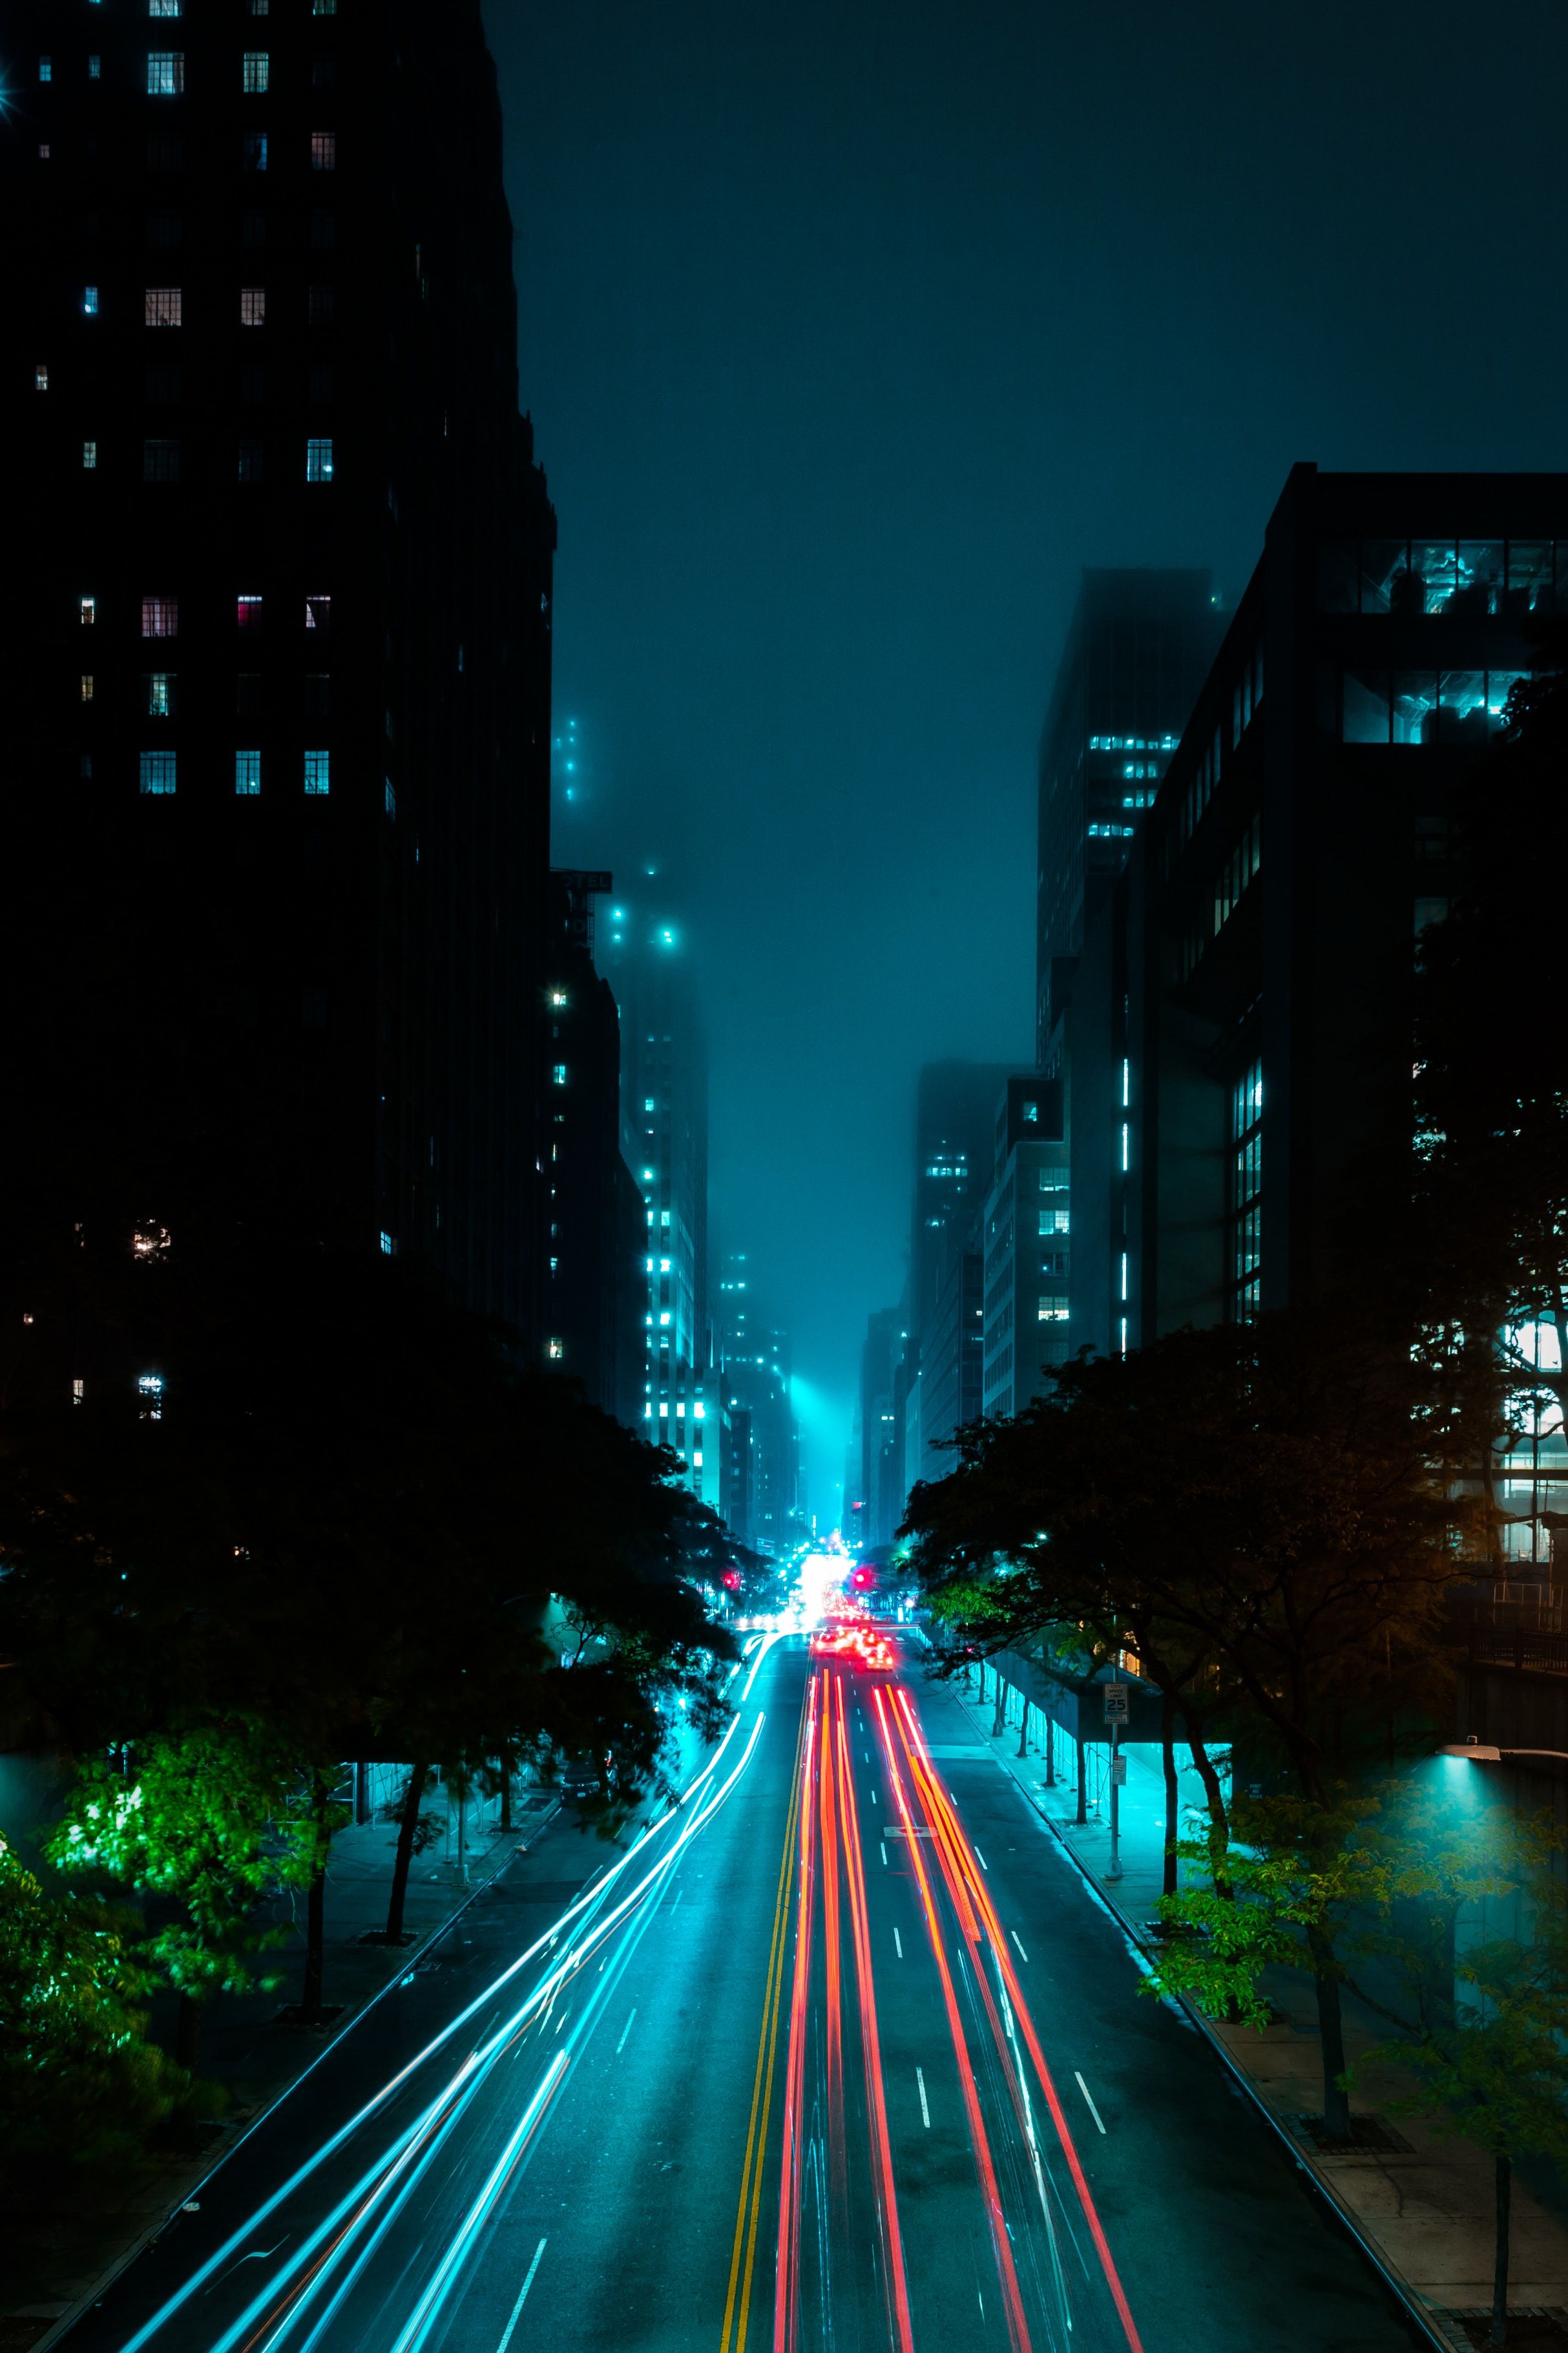 A city street at night with traffic lights and tall buildings. - Night, fog